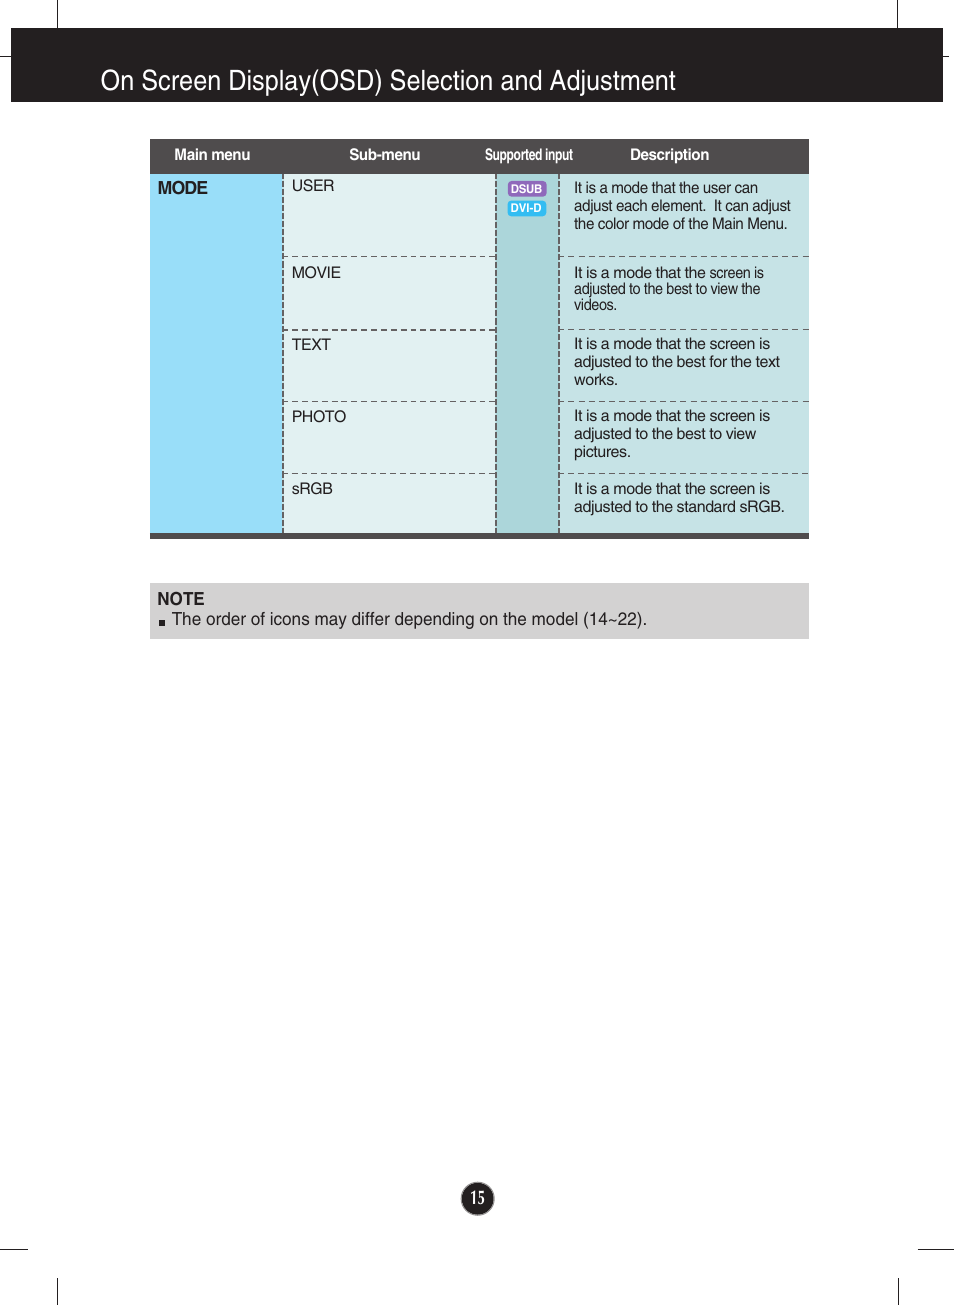 On screen display(osd) selection and adjustment | LG lcd monitor ips231p User Manual | Page 16 / 31